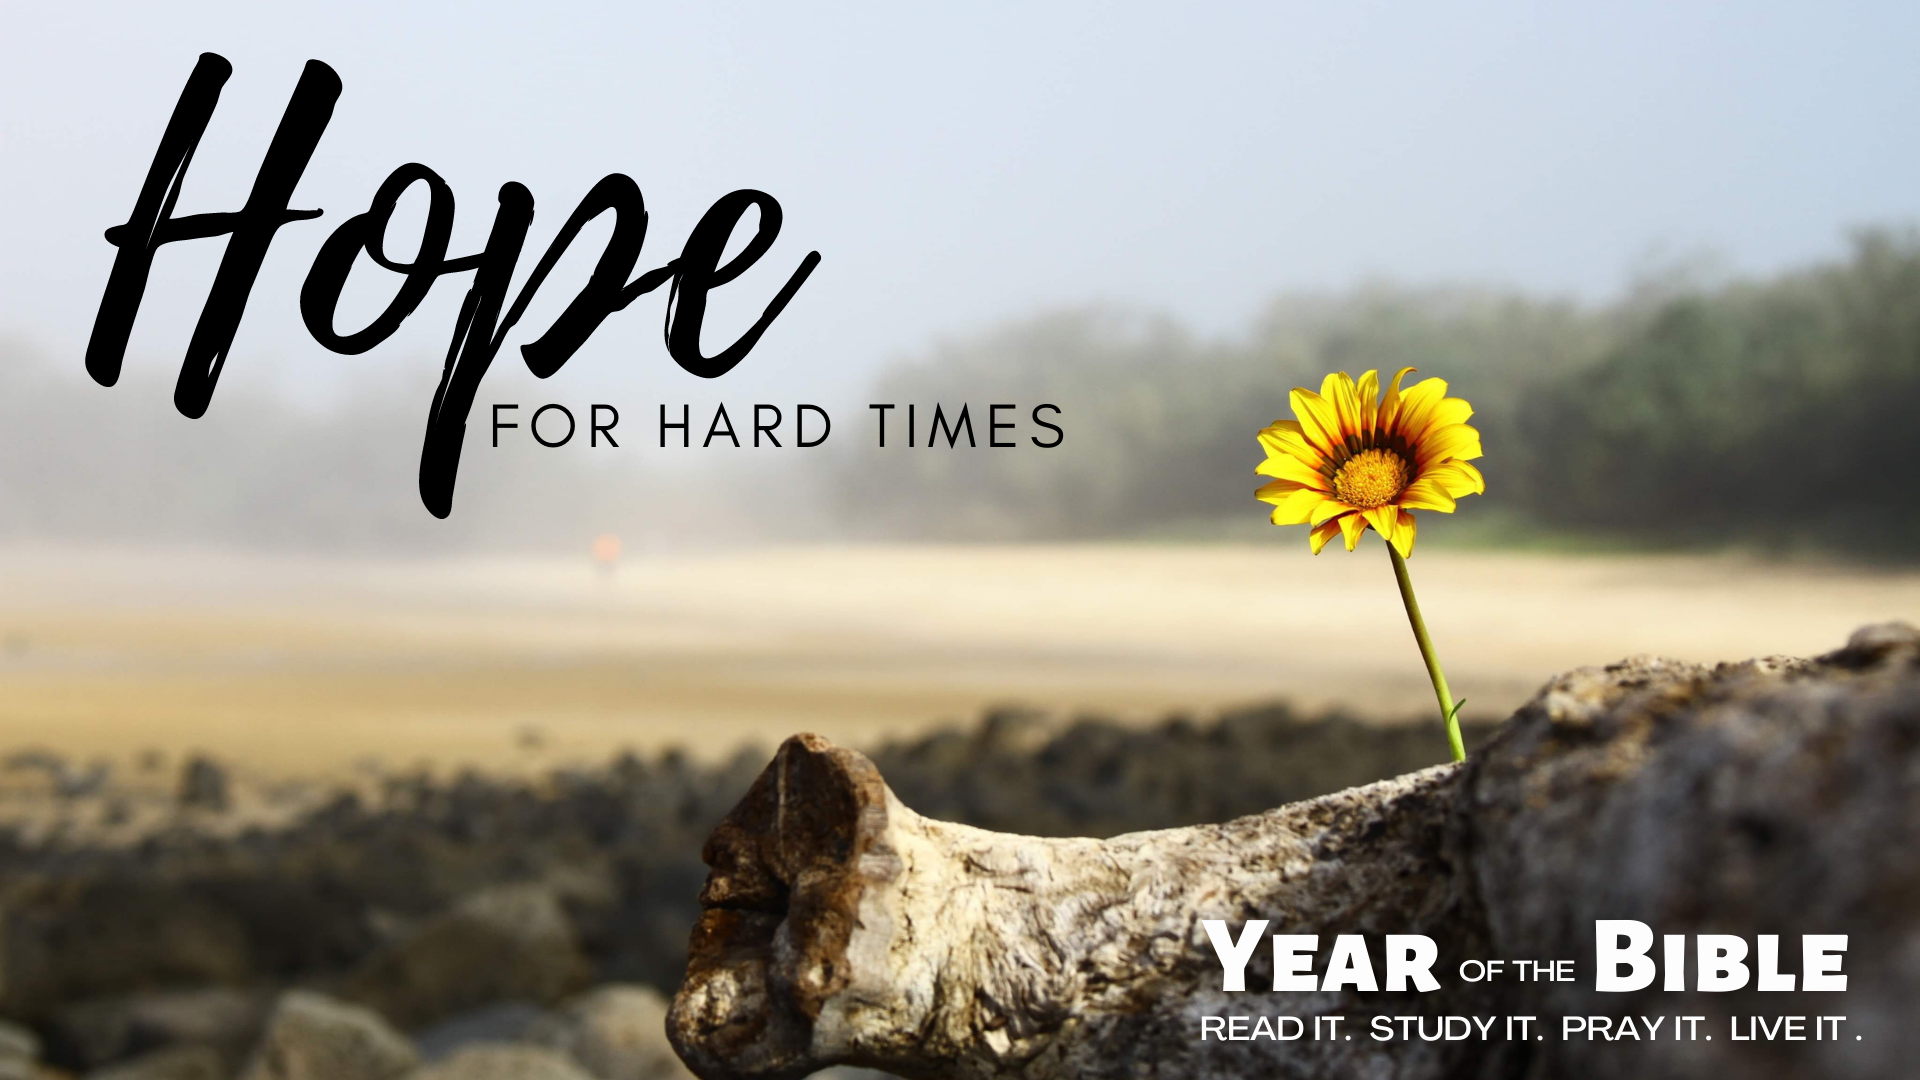 Hope for Hard Times